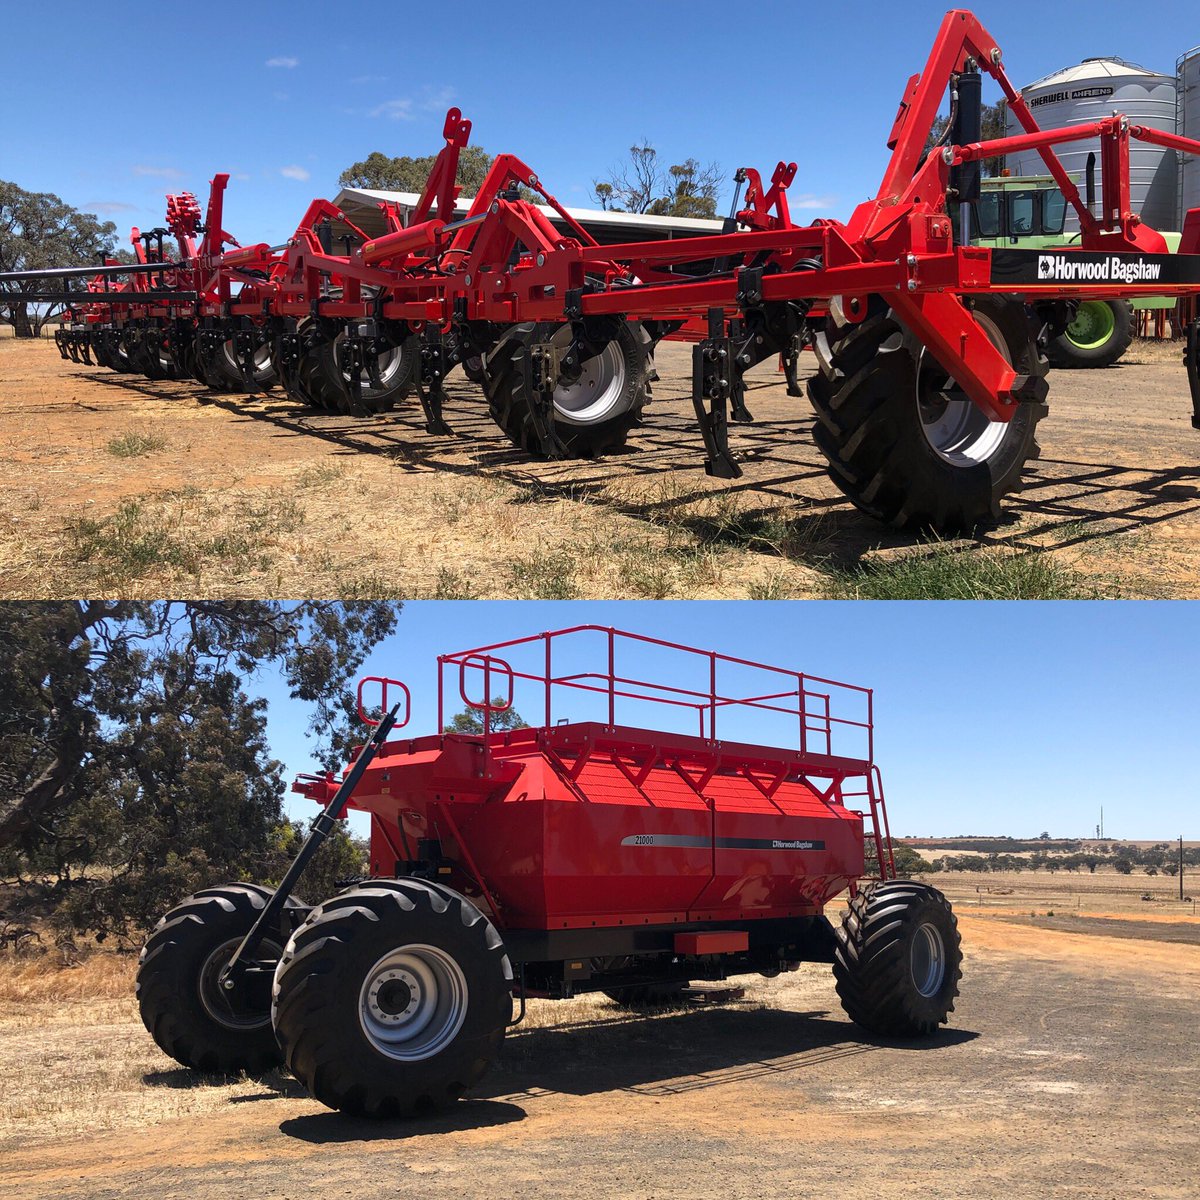 First of x3 60ft Horwood Bagshaw & @Knuckey_Aus Sowing System combinations on farm before Xmas #australianmade #precisionseeding #horwooddealer